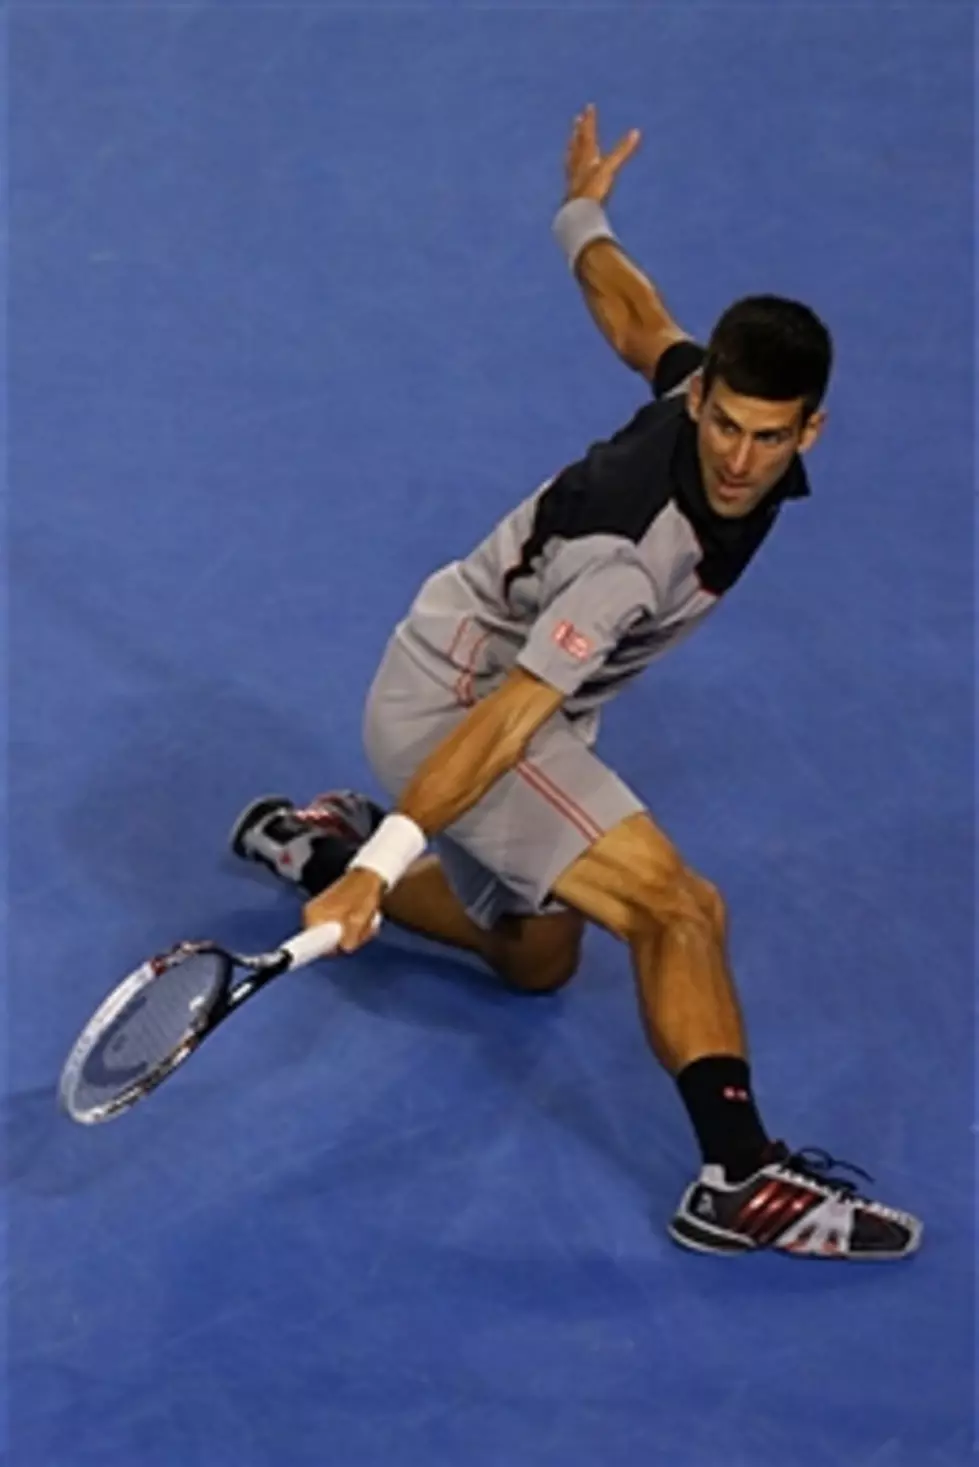 Surprise Down Under:  Djokovic Ousted At Aussie Open